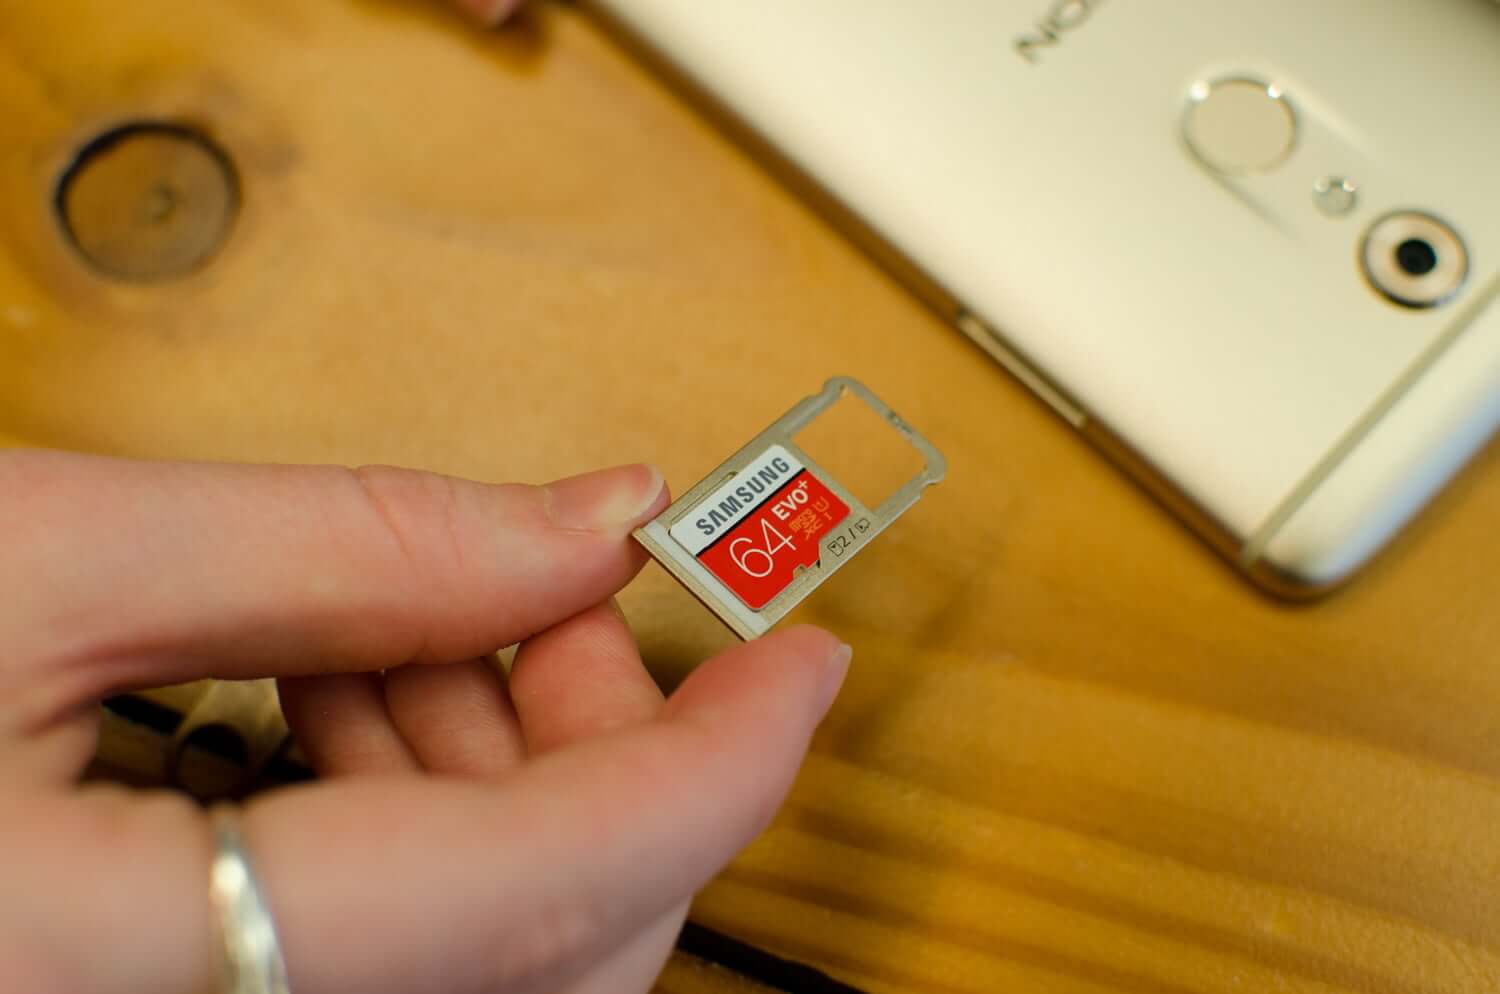 Try Removing and Reinserting the SD Card